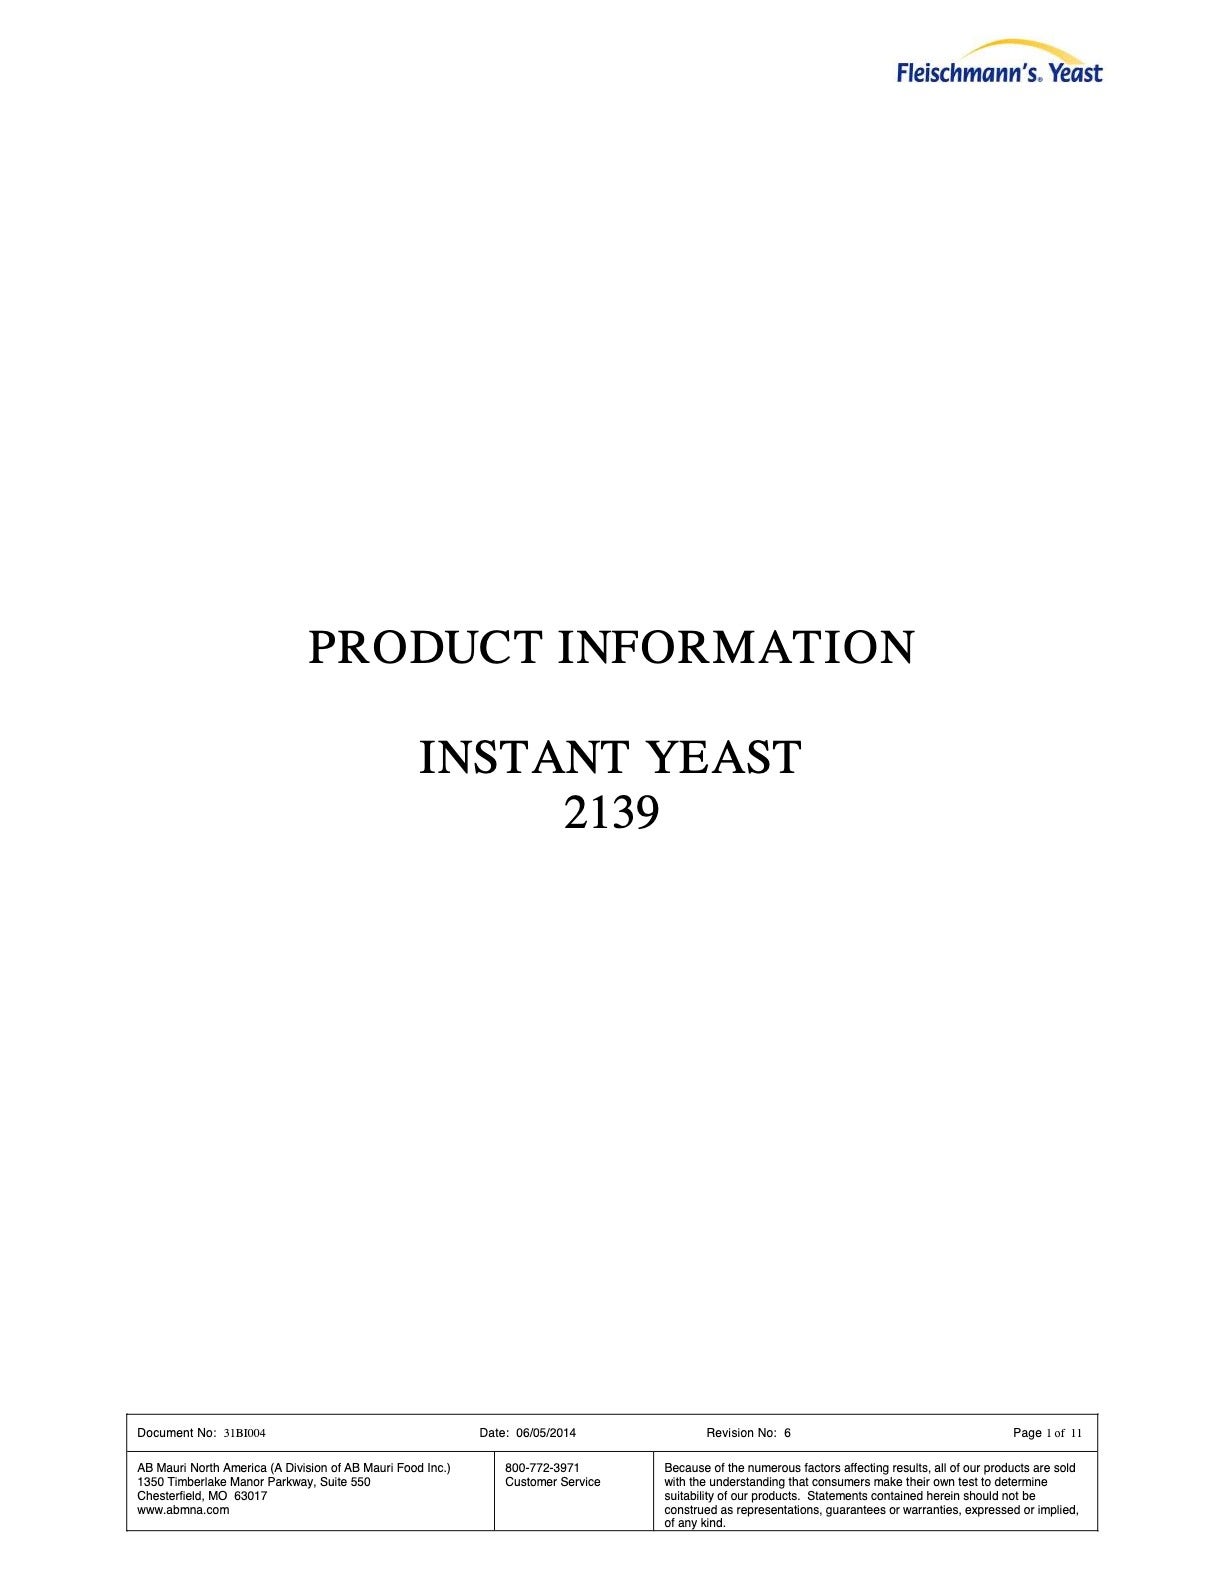 #2139 Instant Yeast Nutritional Info Page 1 by Fleischmann's at Stover & Company 